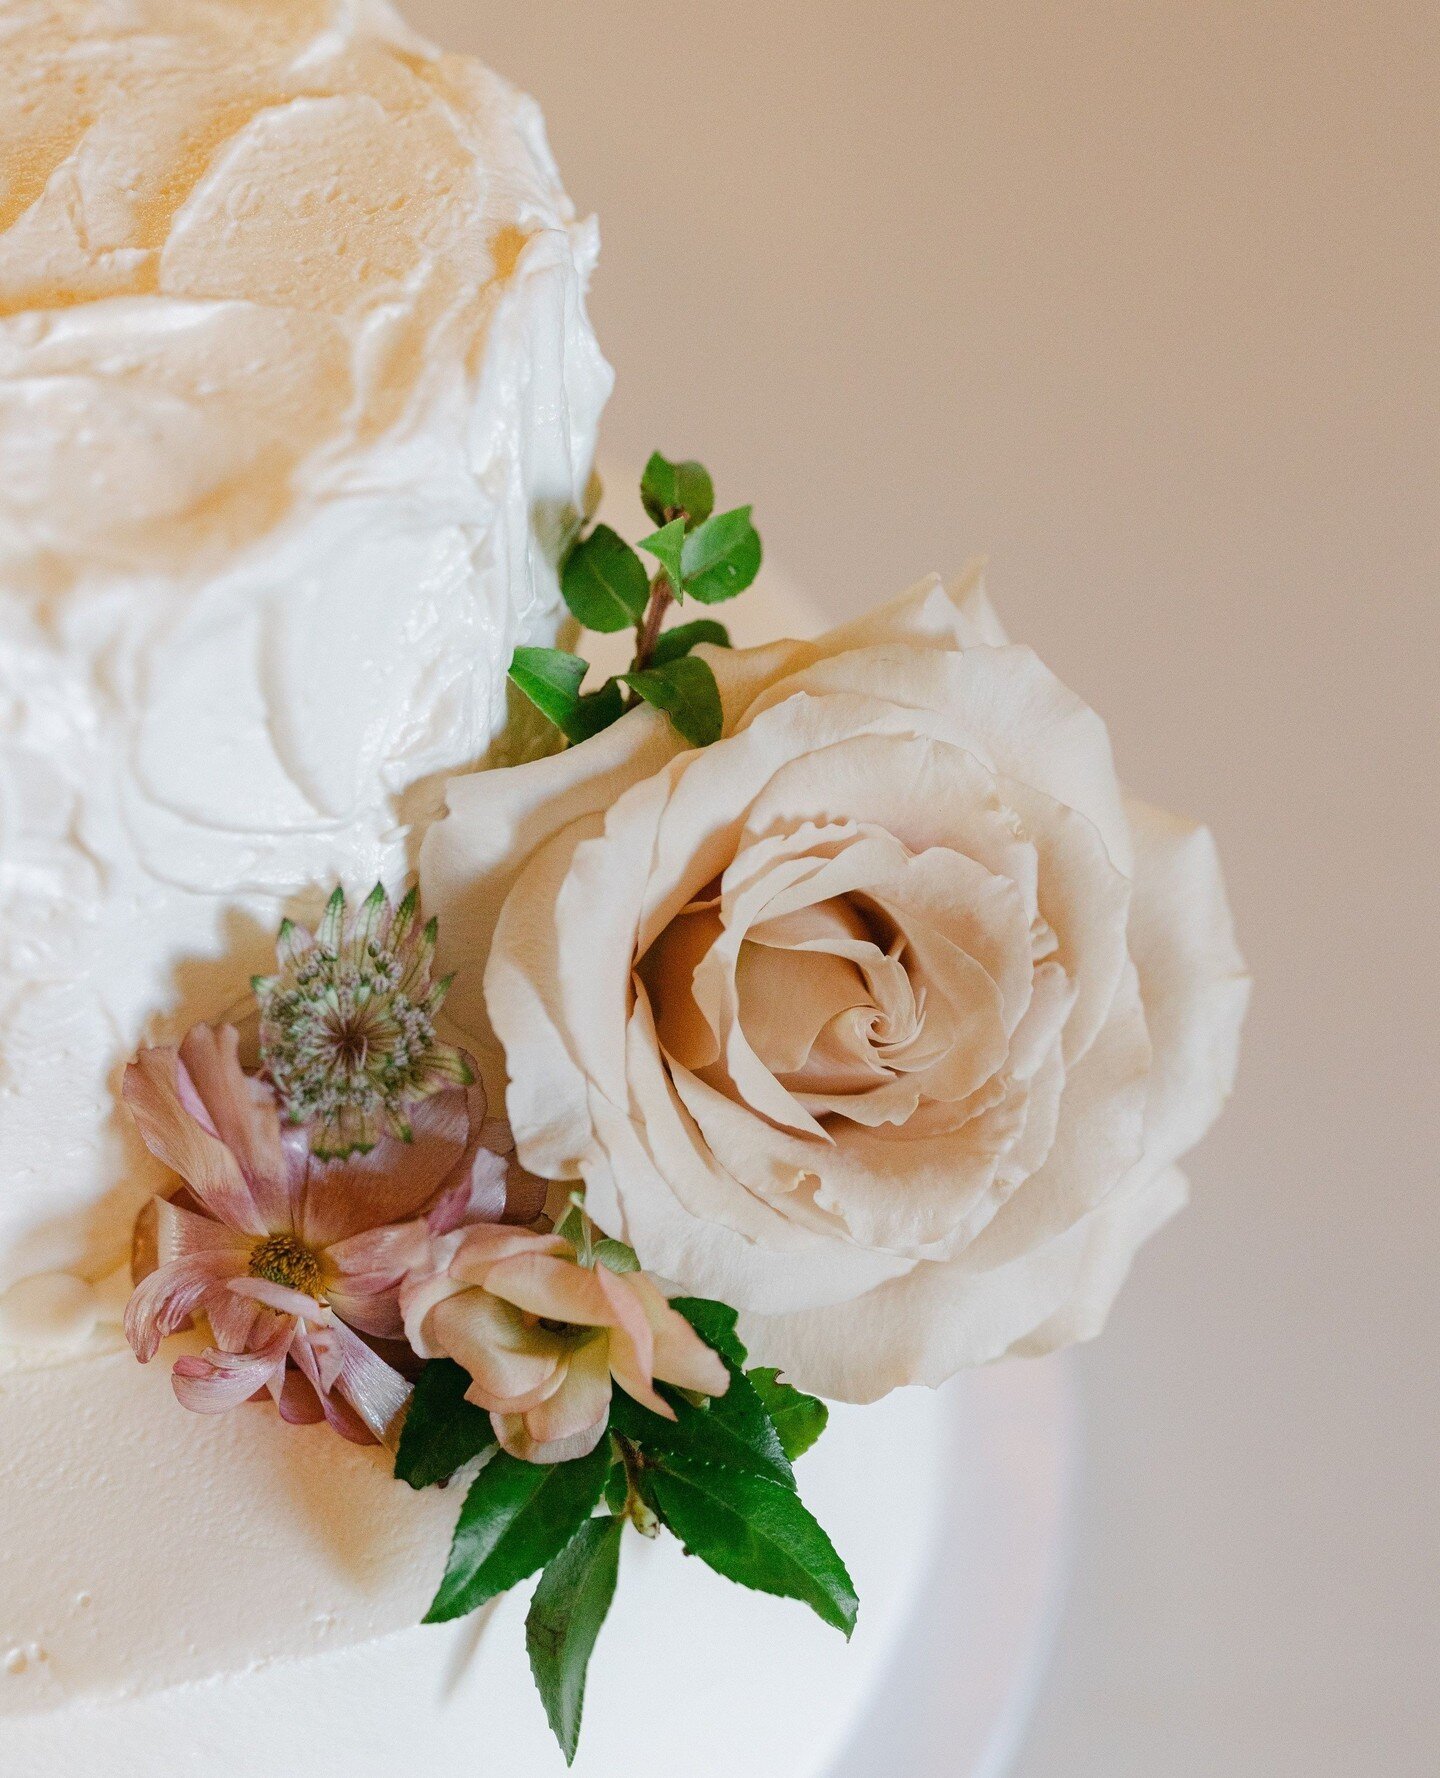 It's all in the details... cake details that is! You can't forget to add fresh blooms to your cake on your special day. ⁠
.⁠
.⁠
.⁠
.⁠
.⁠
.⁠
Photography: @kwpmasters⁠
Planner: @blushbbg⁠
Venue: @casafelizvenue